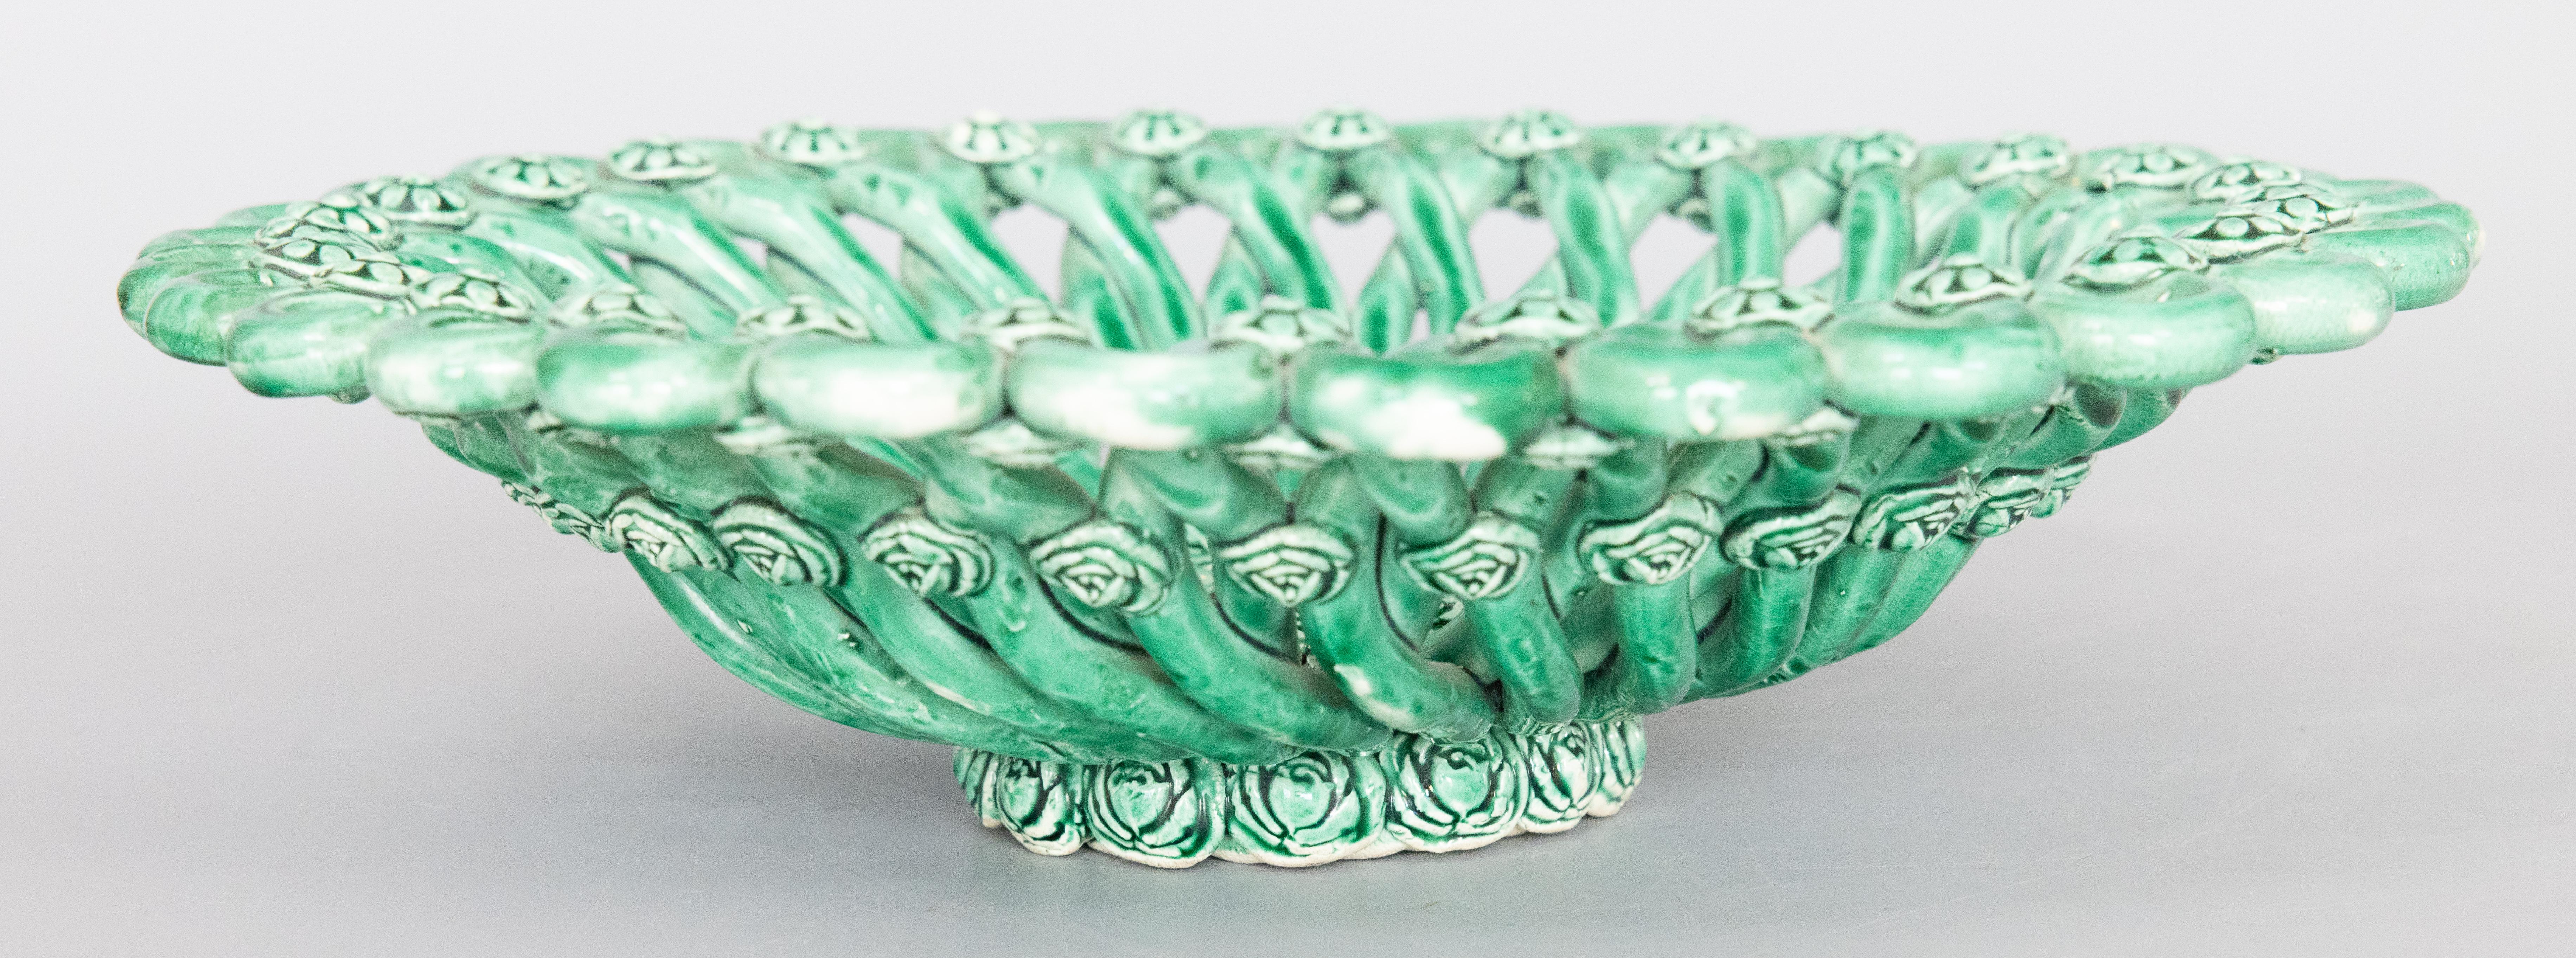 Mid-20th Century French Vallauris Majolica Emerald Green Reticulated Centerpiece Bowl, Circa 1940 For Sale